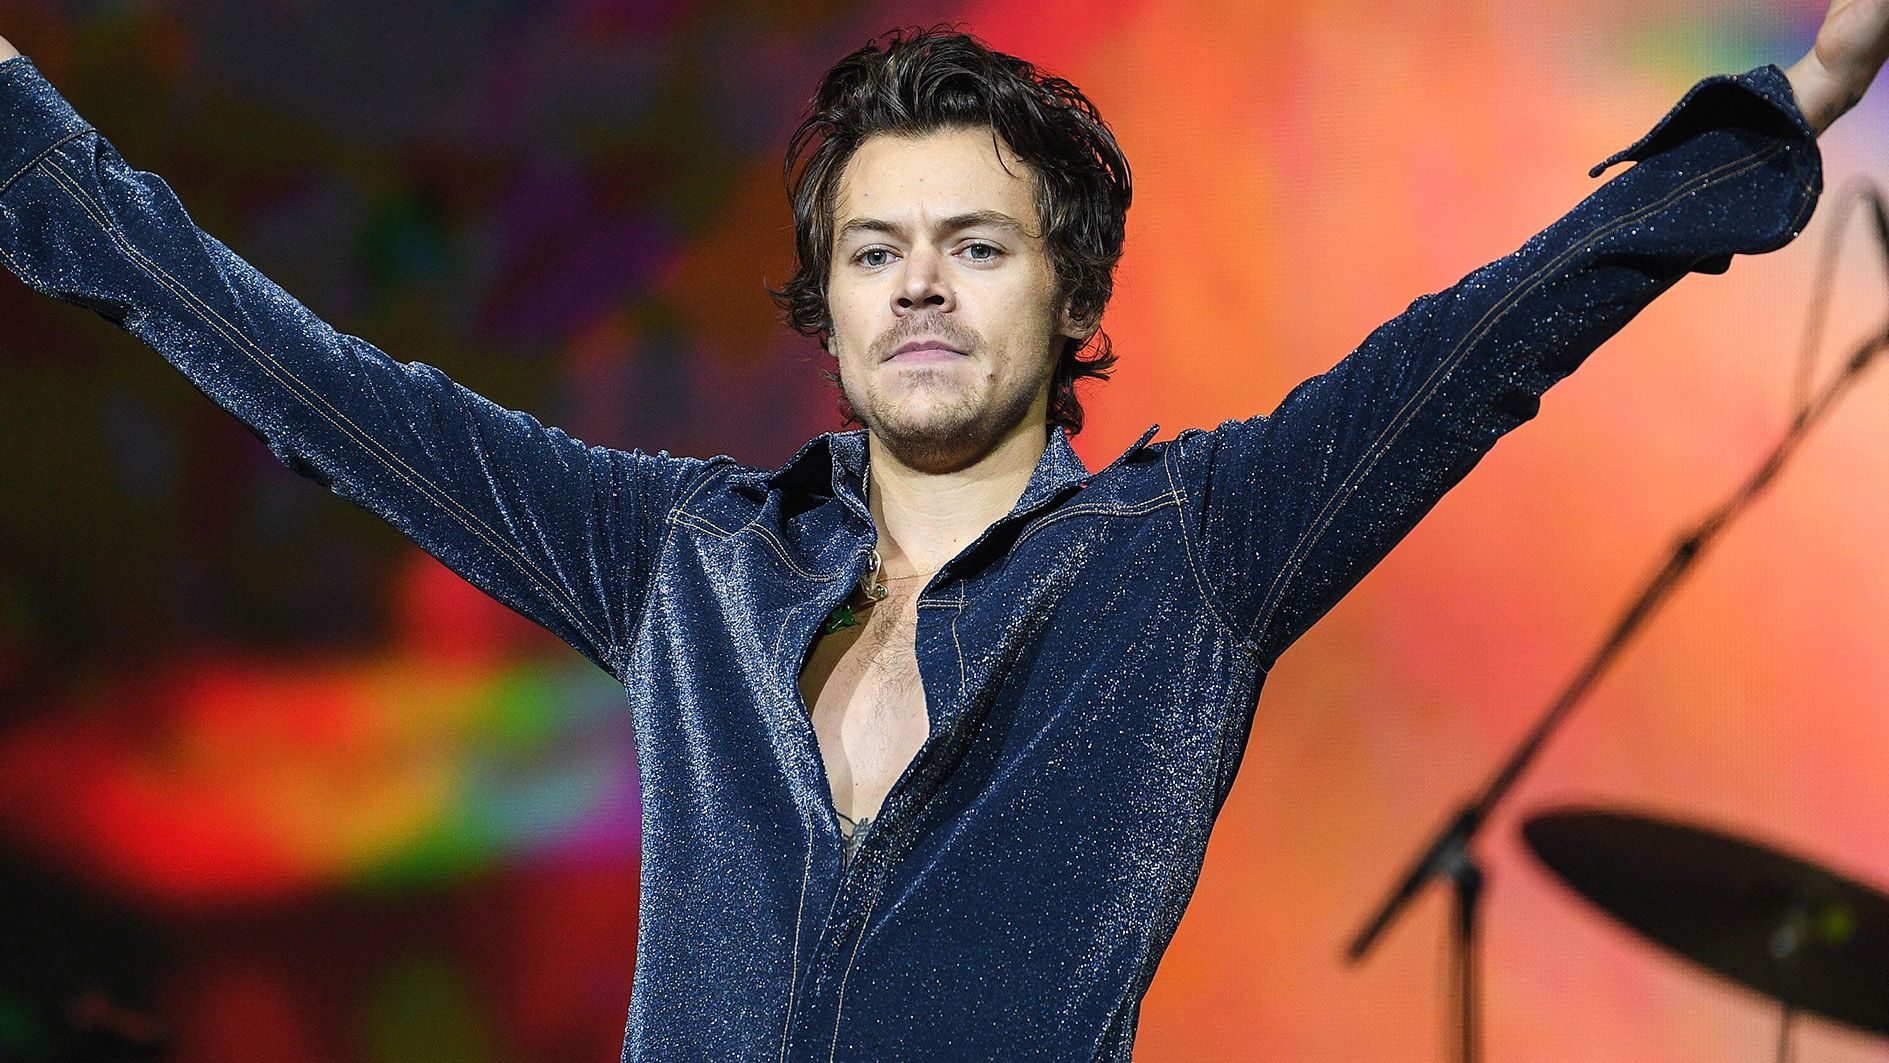 Harry Styles's 'Love On Tour' Concert - New Dates and Details